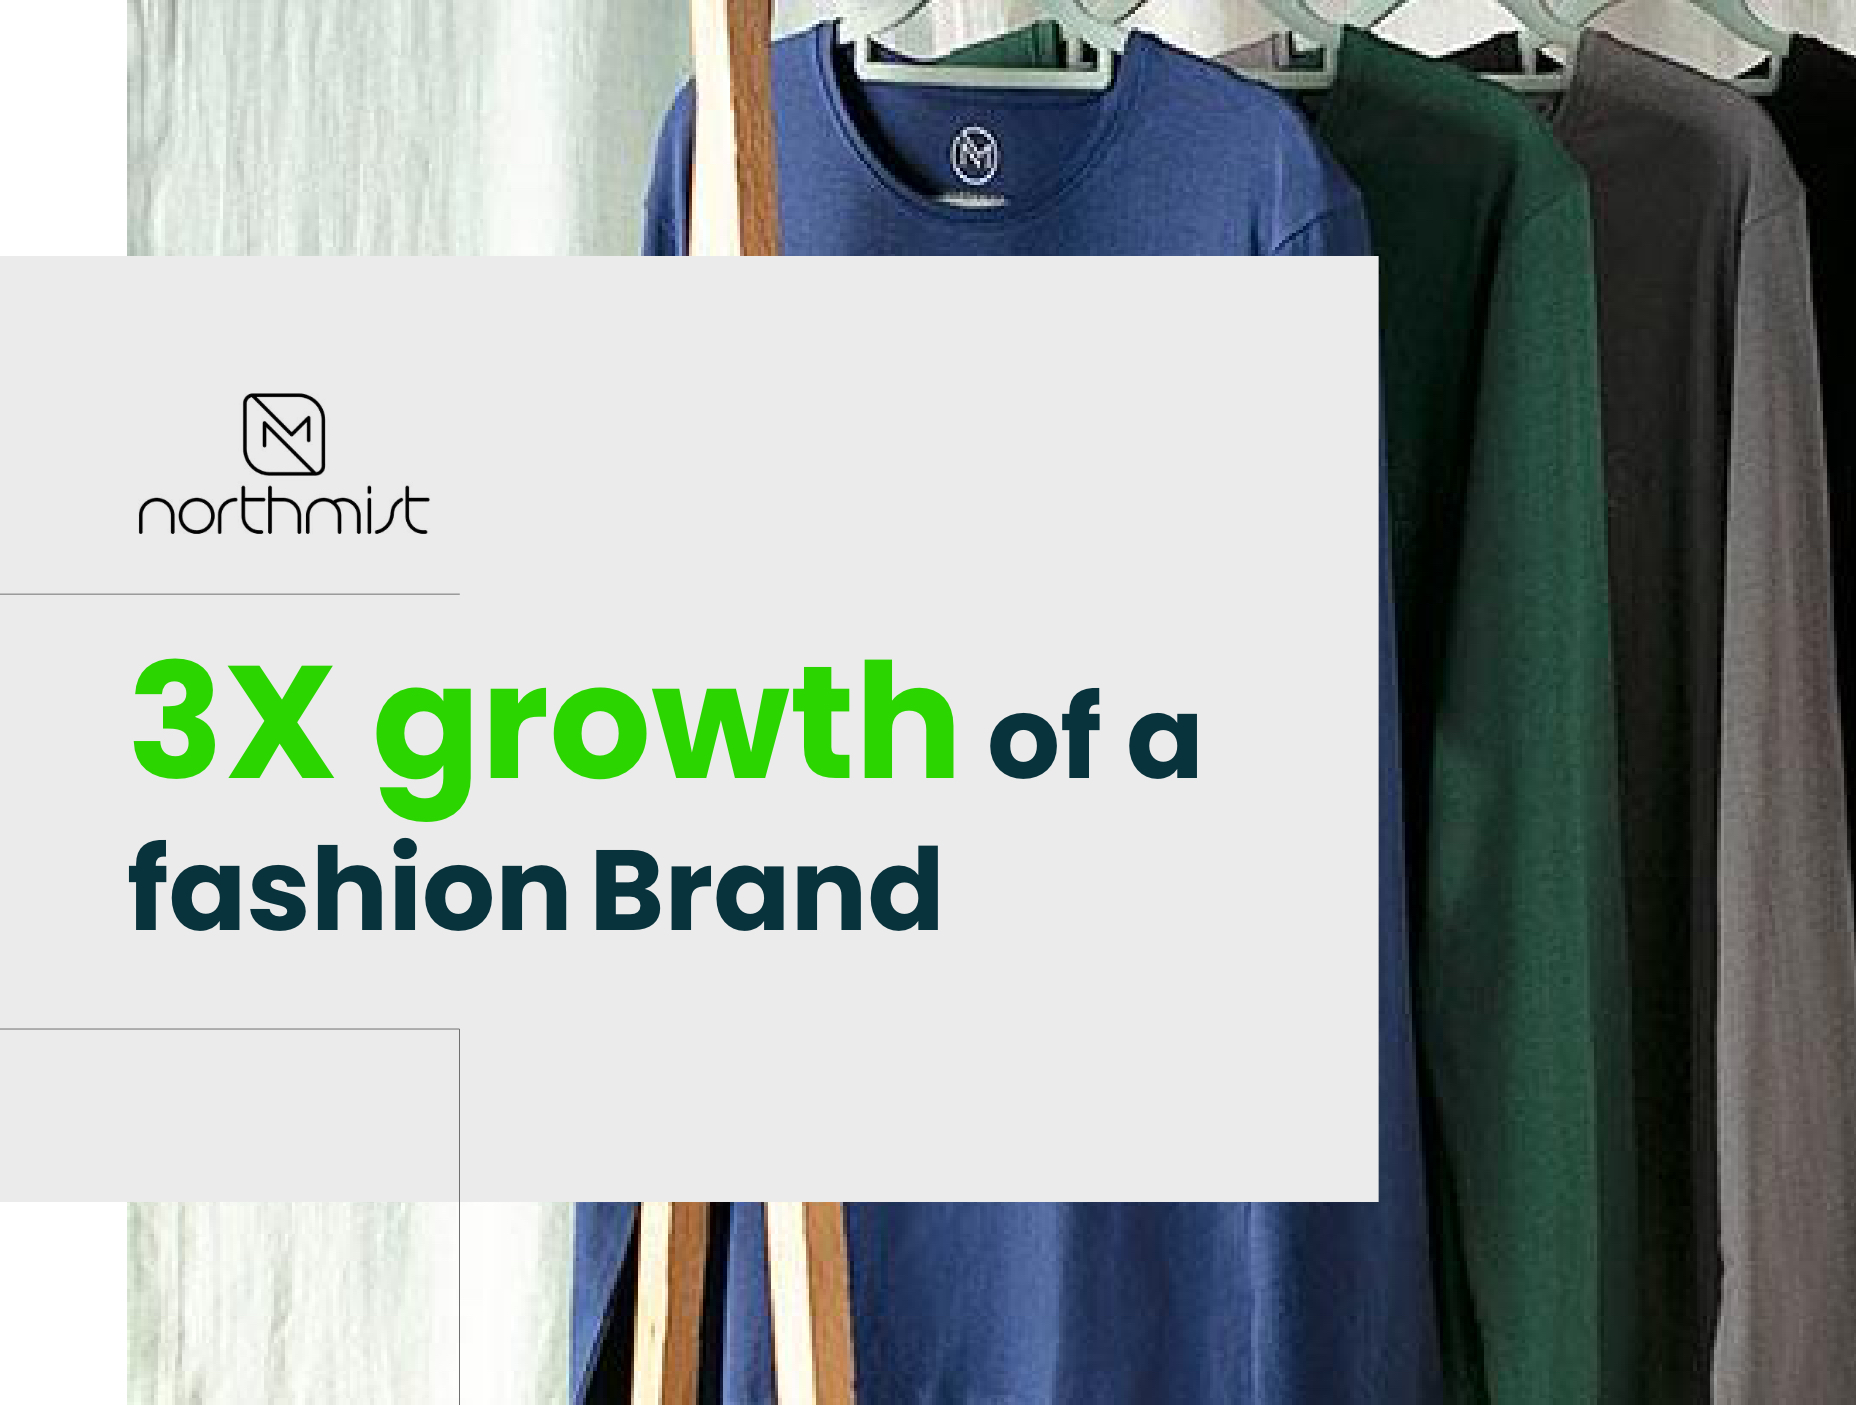 How a digital marketing agency in Bangalore helped a fashion brand to grow by 3X